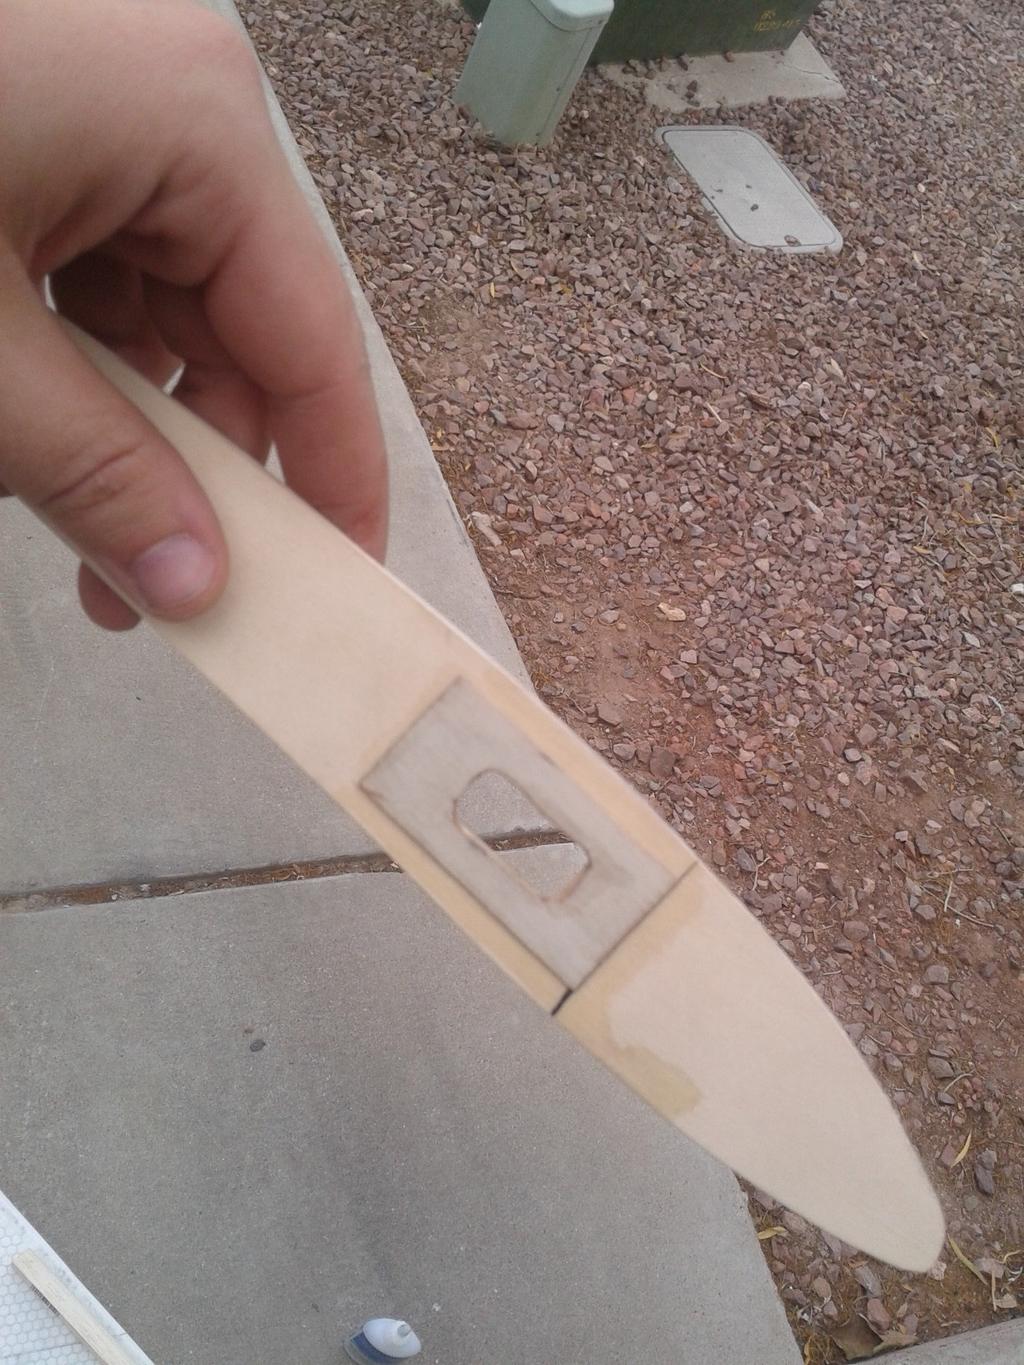 The leading edge was changed from carbon fiber to balsa wood because it is lighter, less expensive, and the stress observed from a hard crash would break the leading edge